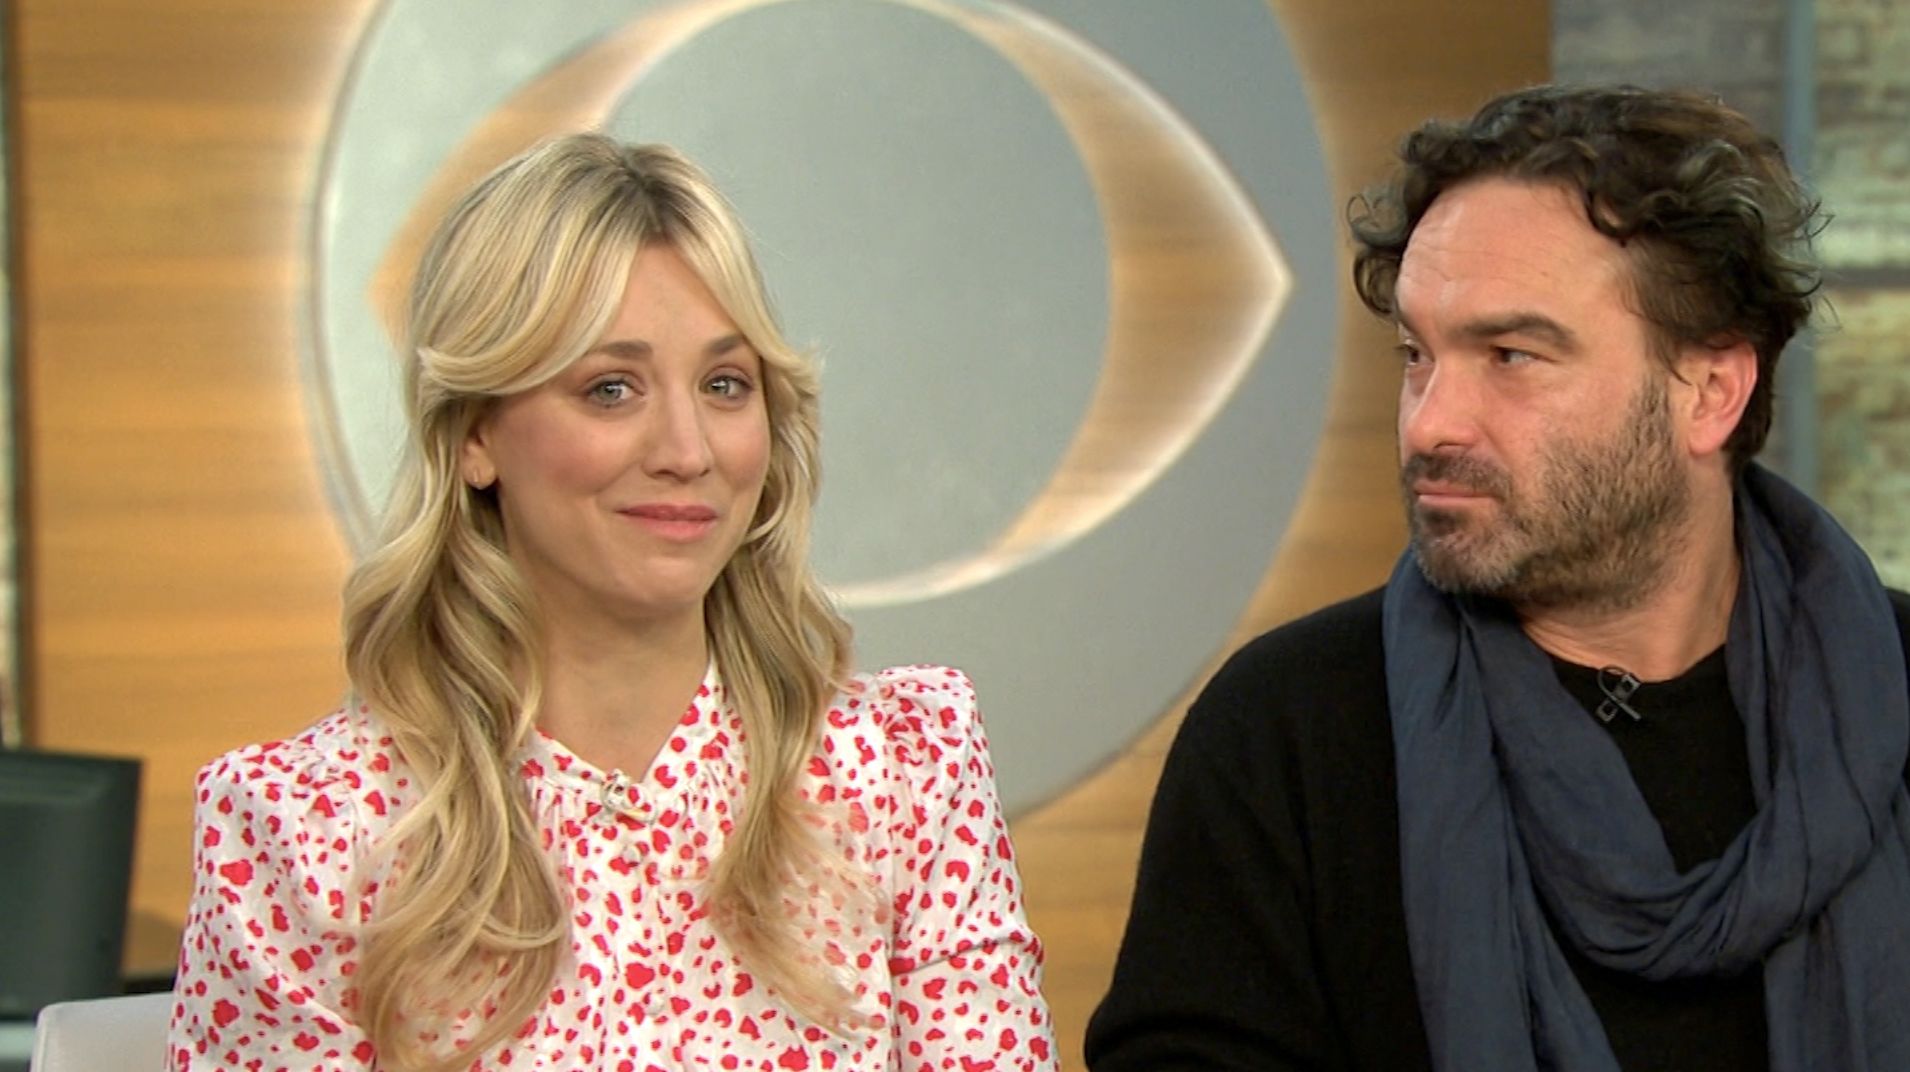 Kaley Cuoco talks filming 'Big Bang Theory' sex scenes with her ex | CNN